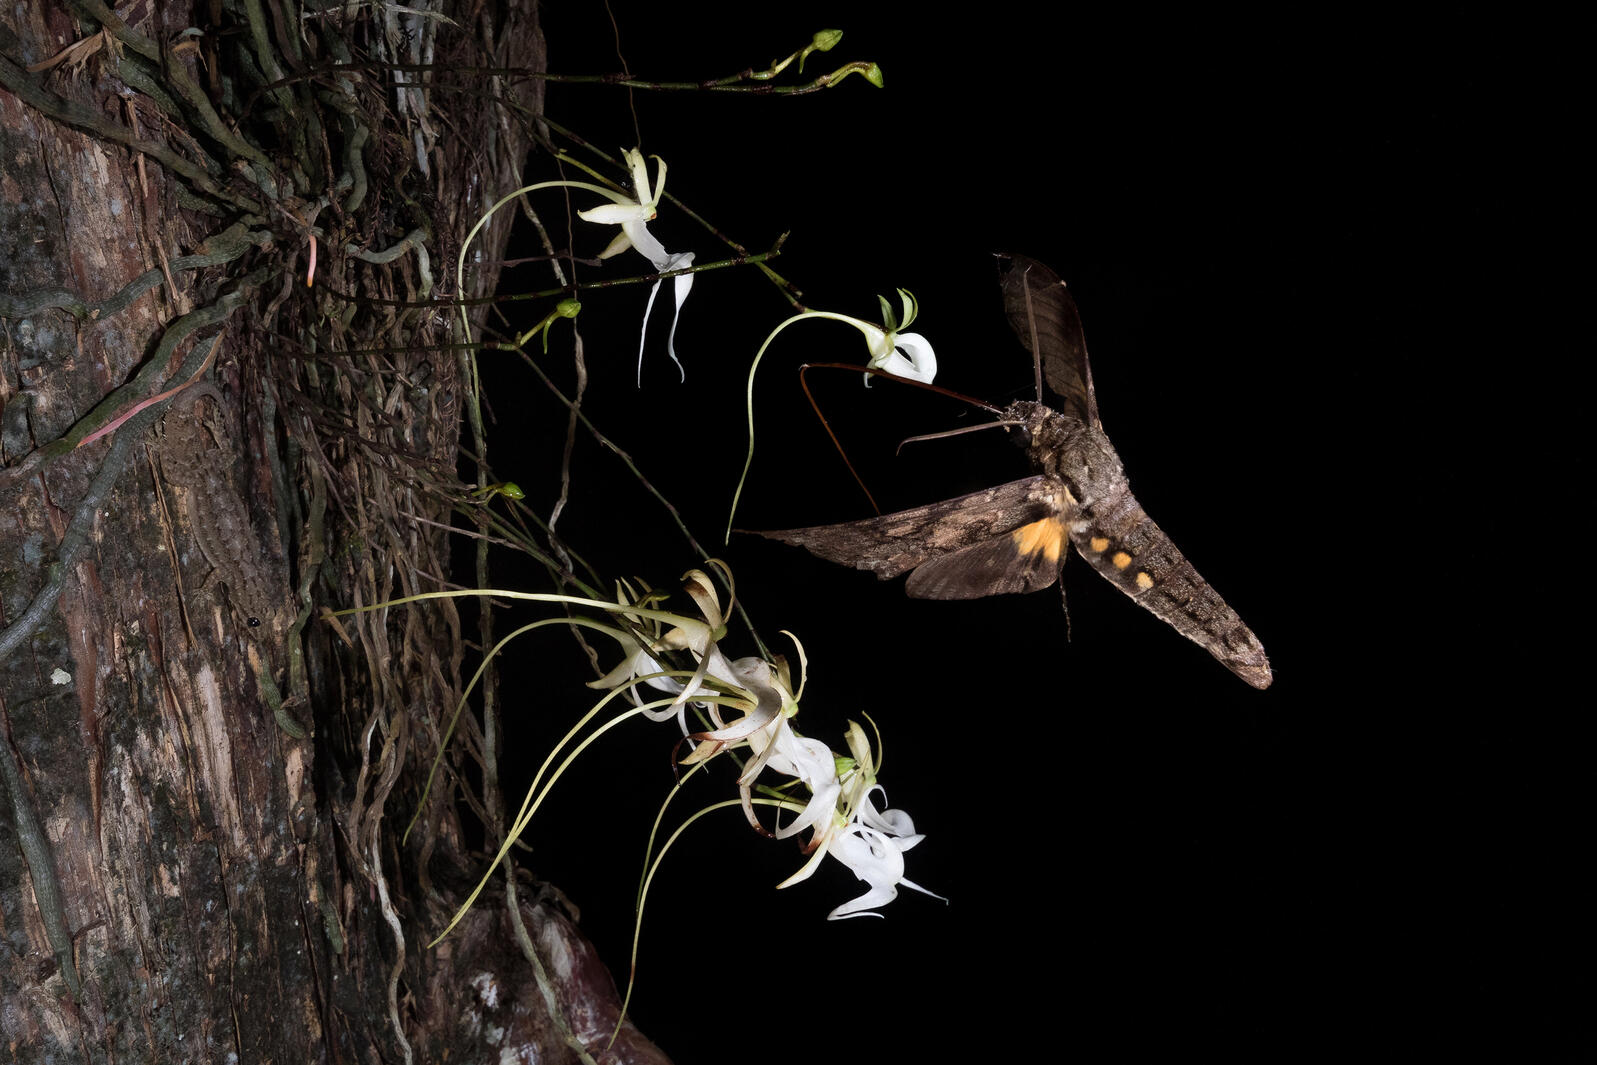 A large moth pollinating flowers